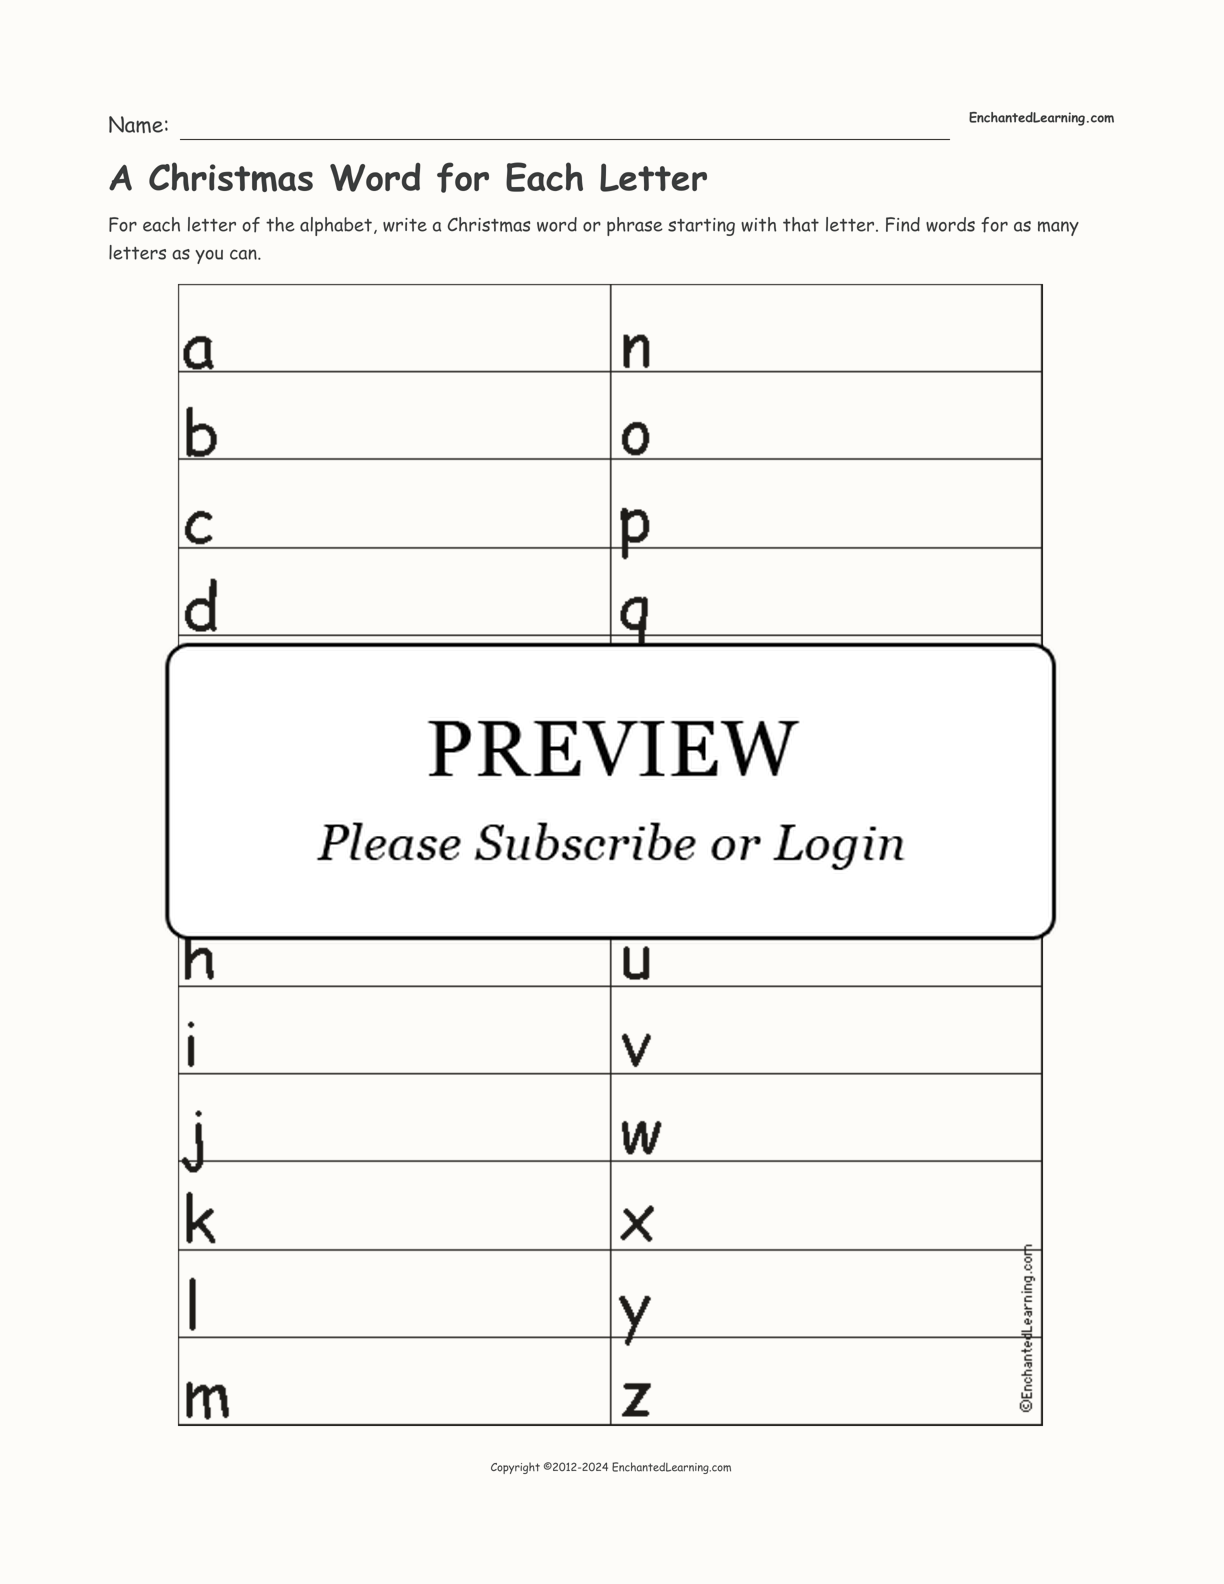 A Christmas Word for Each Letter interactive worksheet page 1